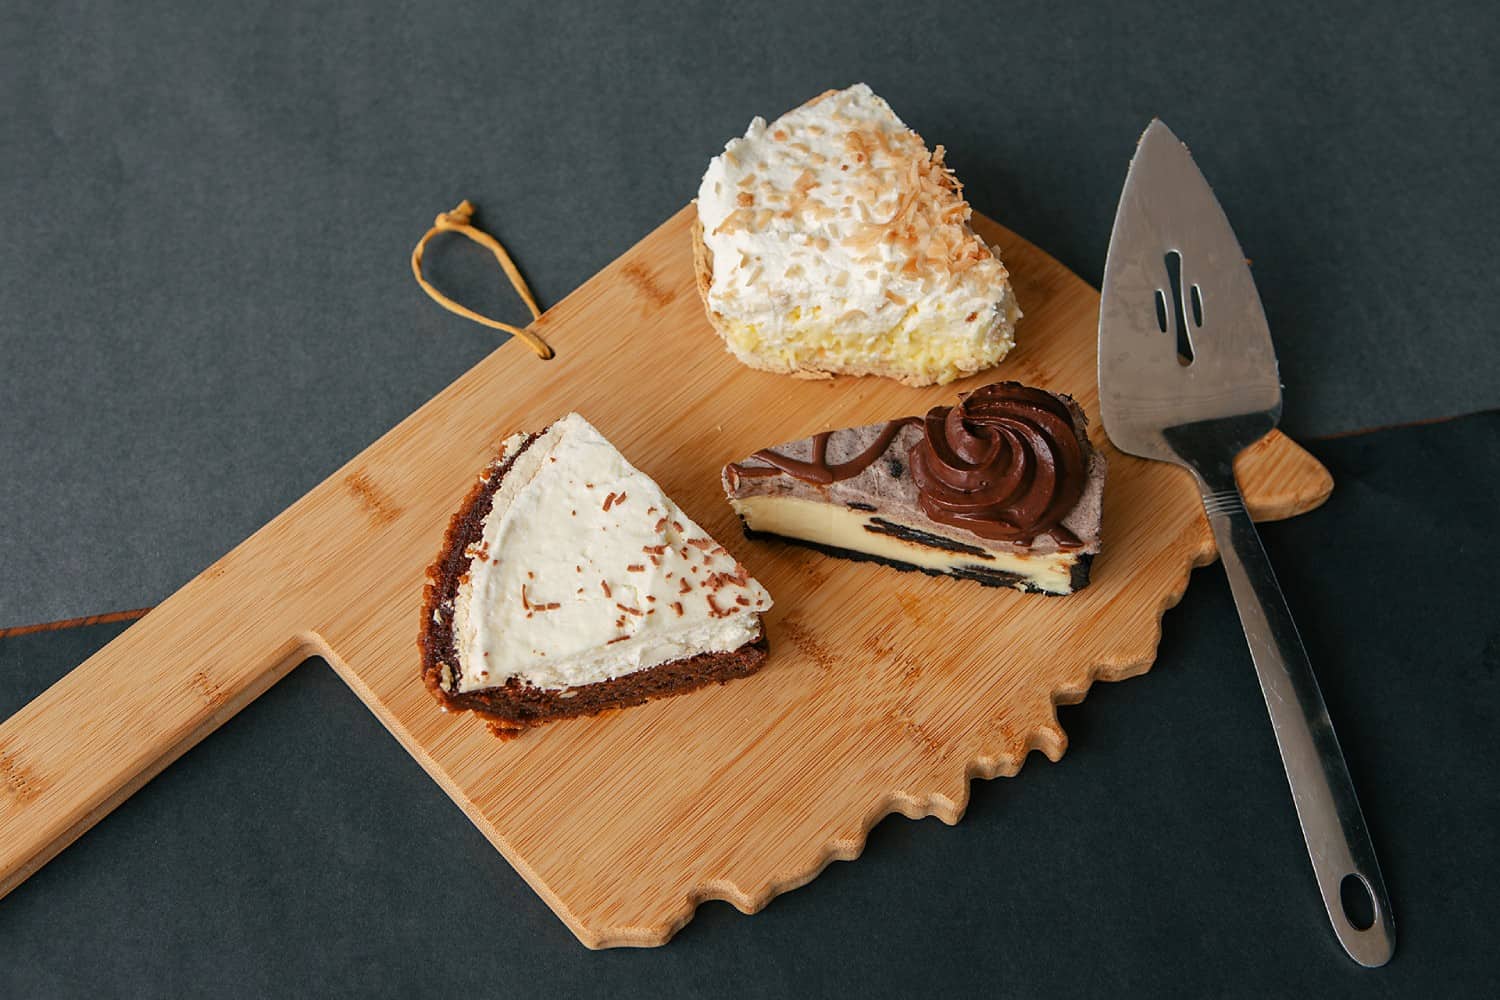 Oklahoma shaped serving board and 3 pie slices